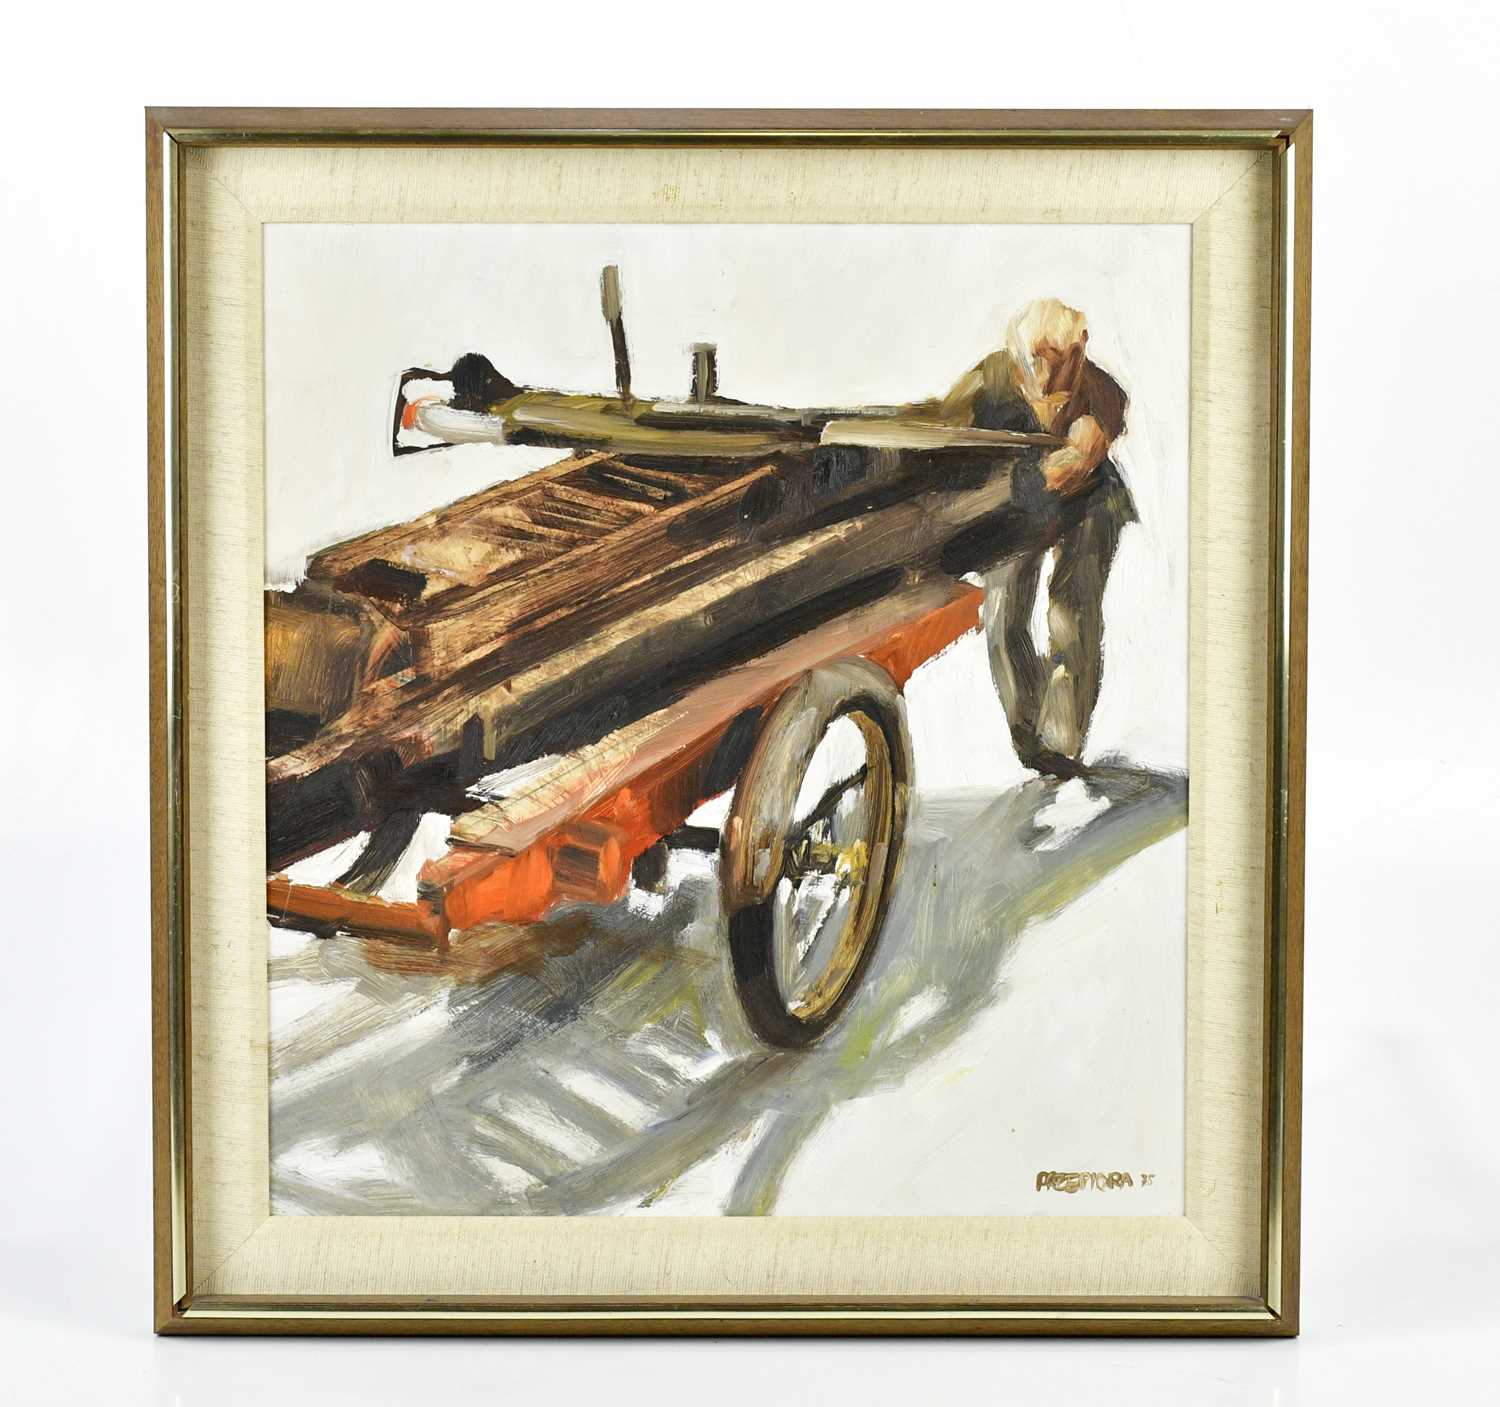 † DAVID STEFAN PRZEPRIOA (born 1944); oil on board, figure pushing cart, signed and dated 75, 47 x